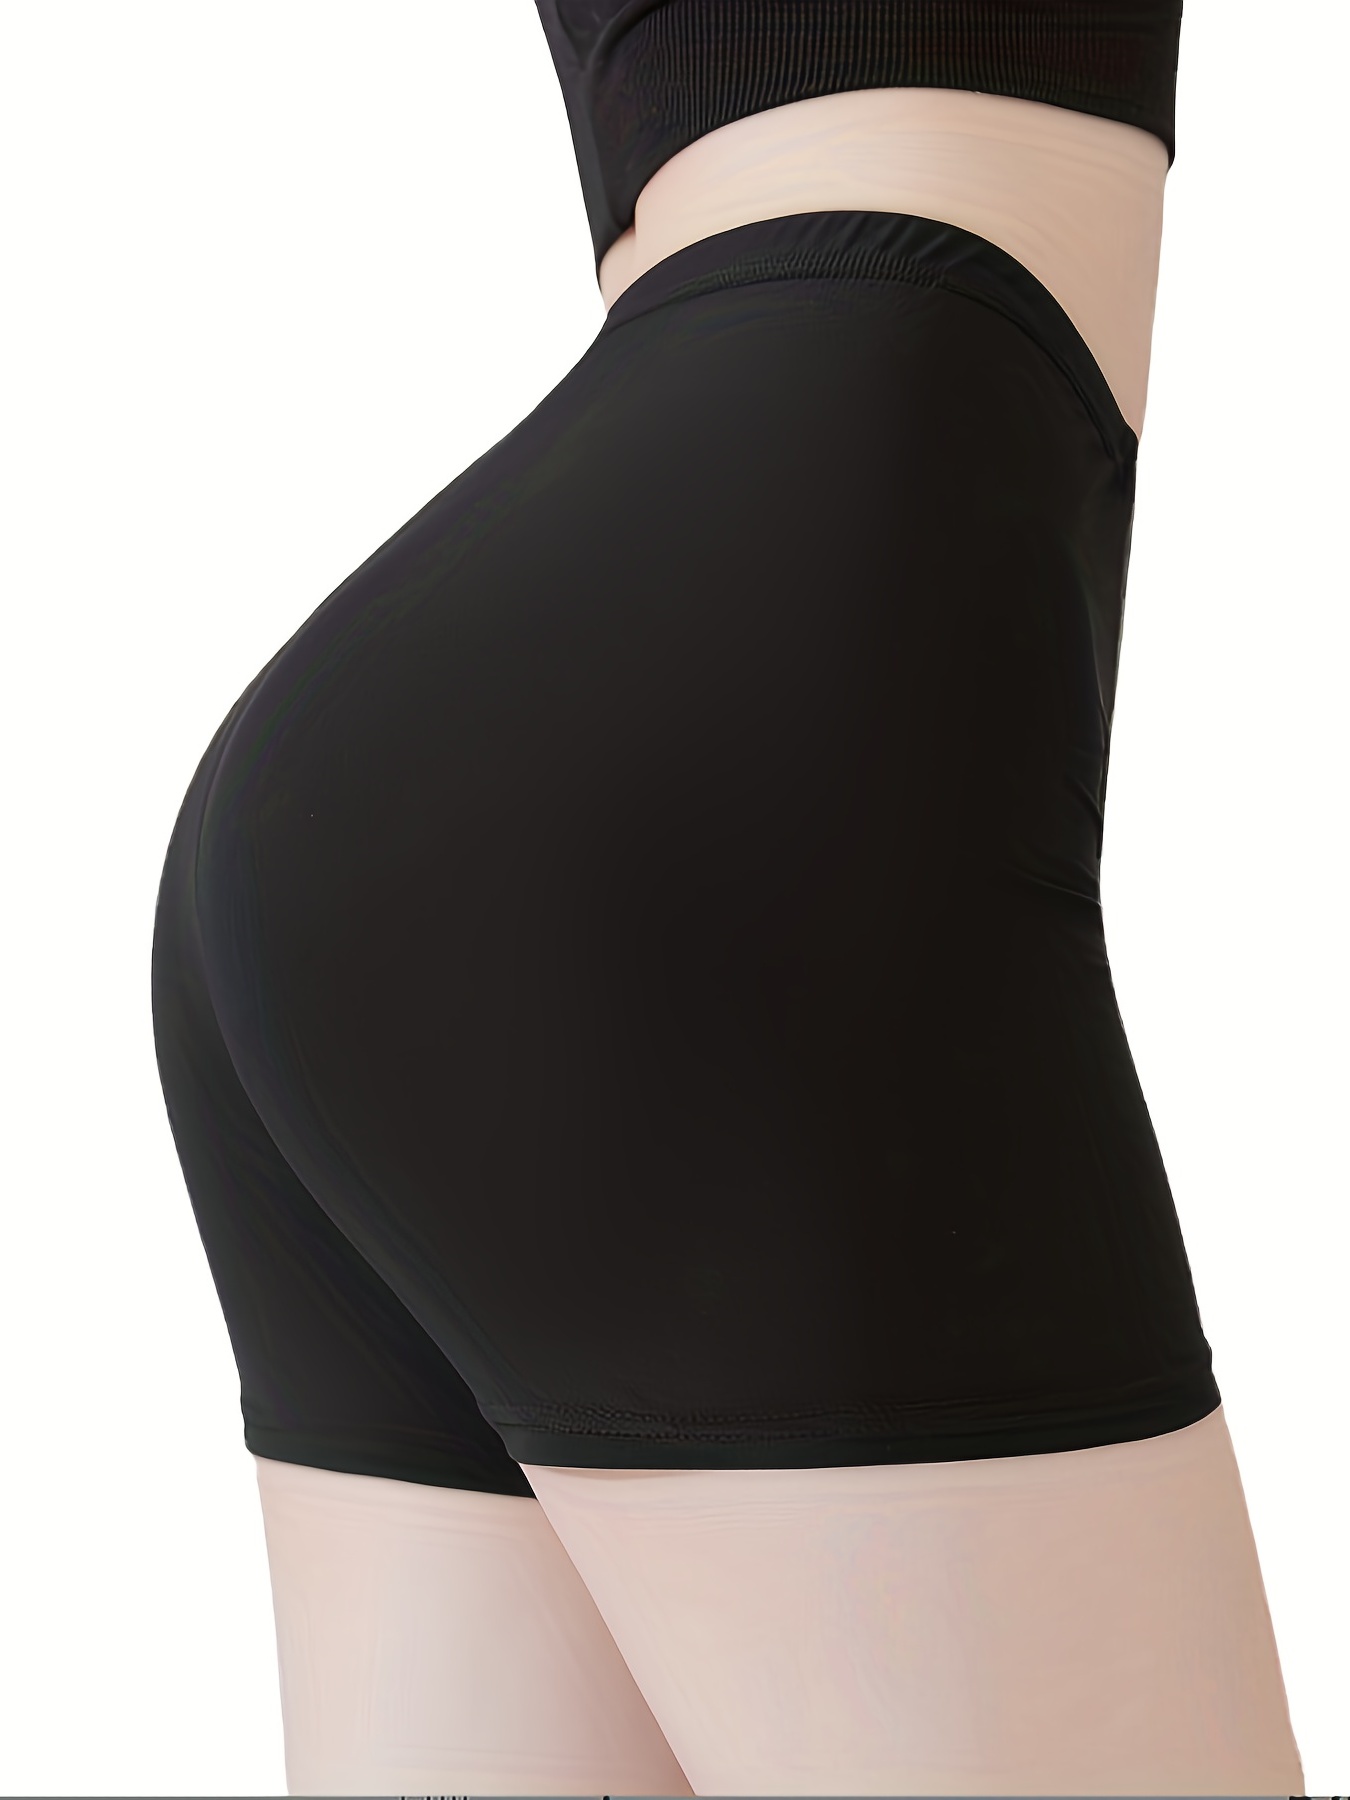 Fusipu High Waist Tummy Control Seamless Women Safety Pants Double-Layer  Safety Pants with Crotch Cover Female Clothes